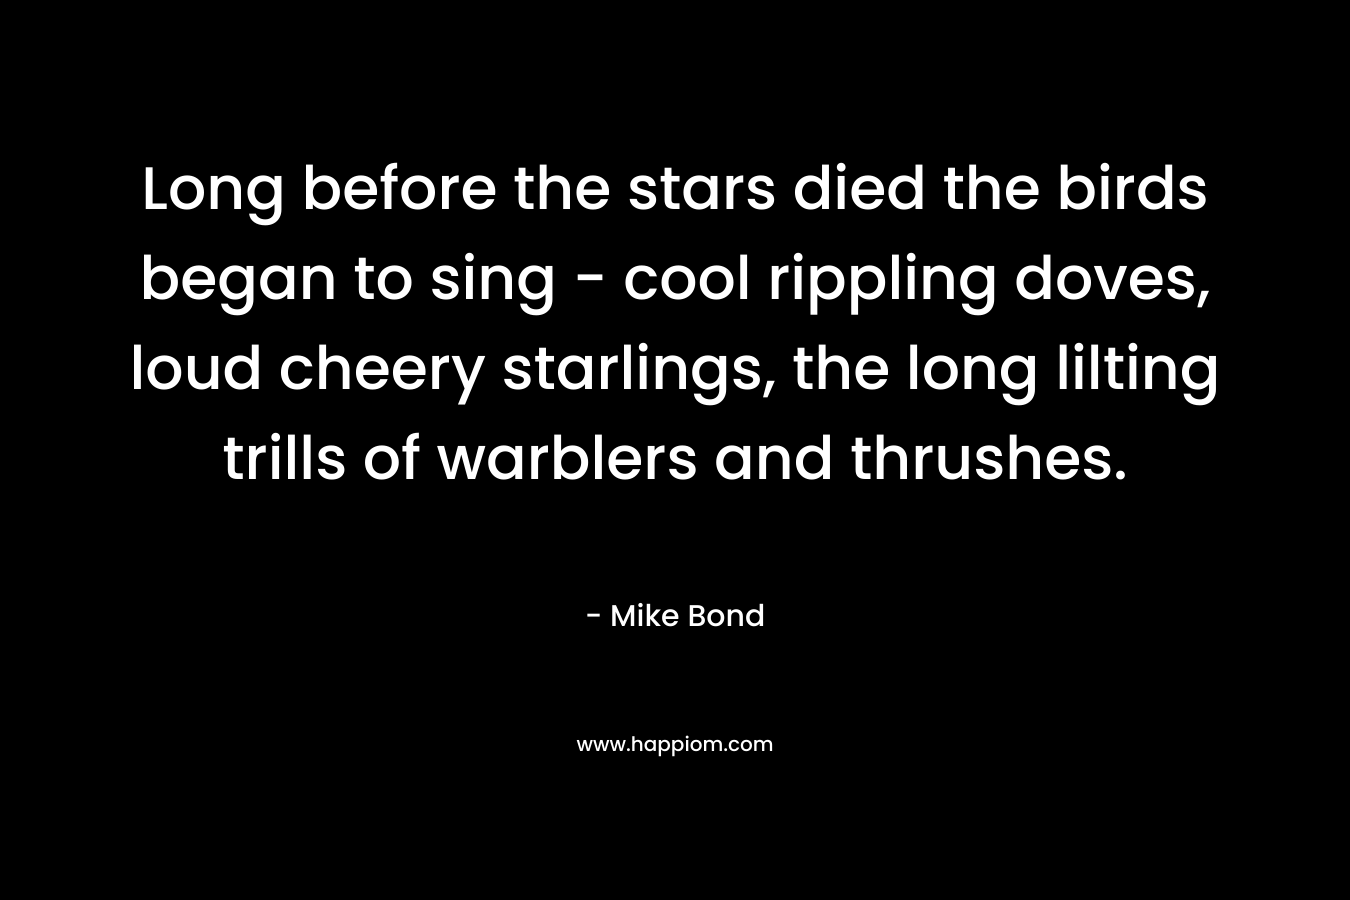 Long before the stars died the birds began to sing – cool rippling doves, loud cheery starlings, the long lilting trills of warblers and thrushes. – Mike Bond